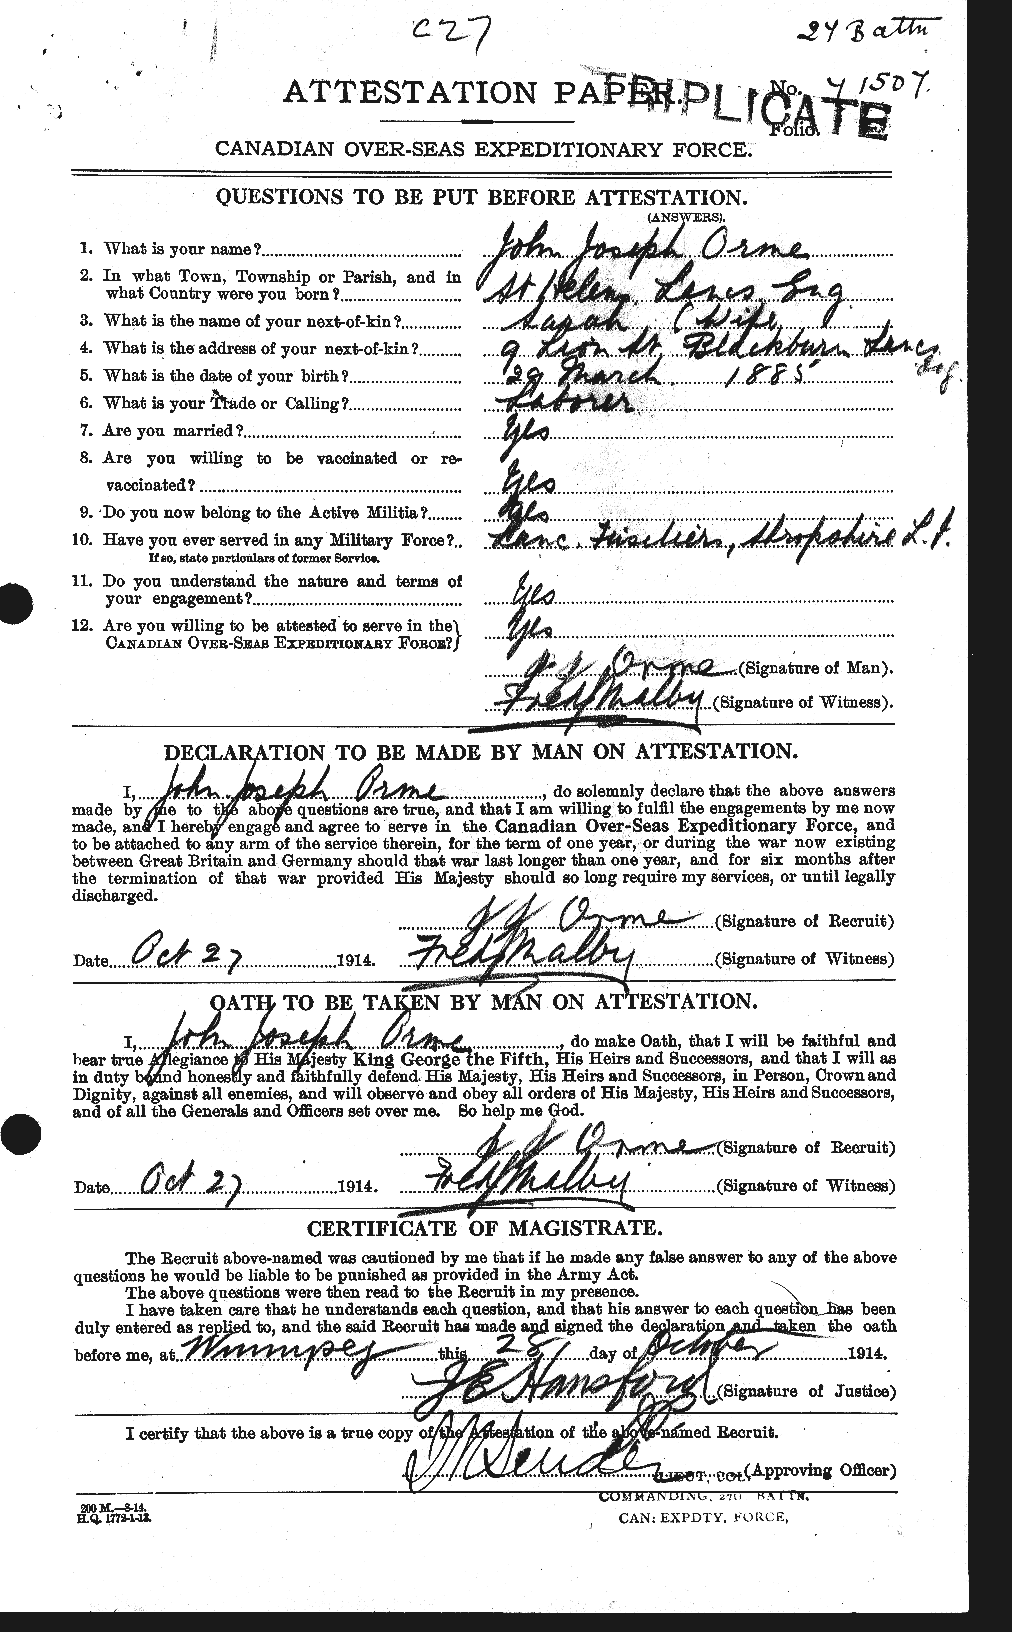 Personnel Records of the First World War - CEF 559636a